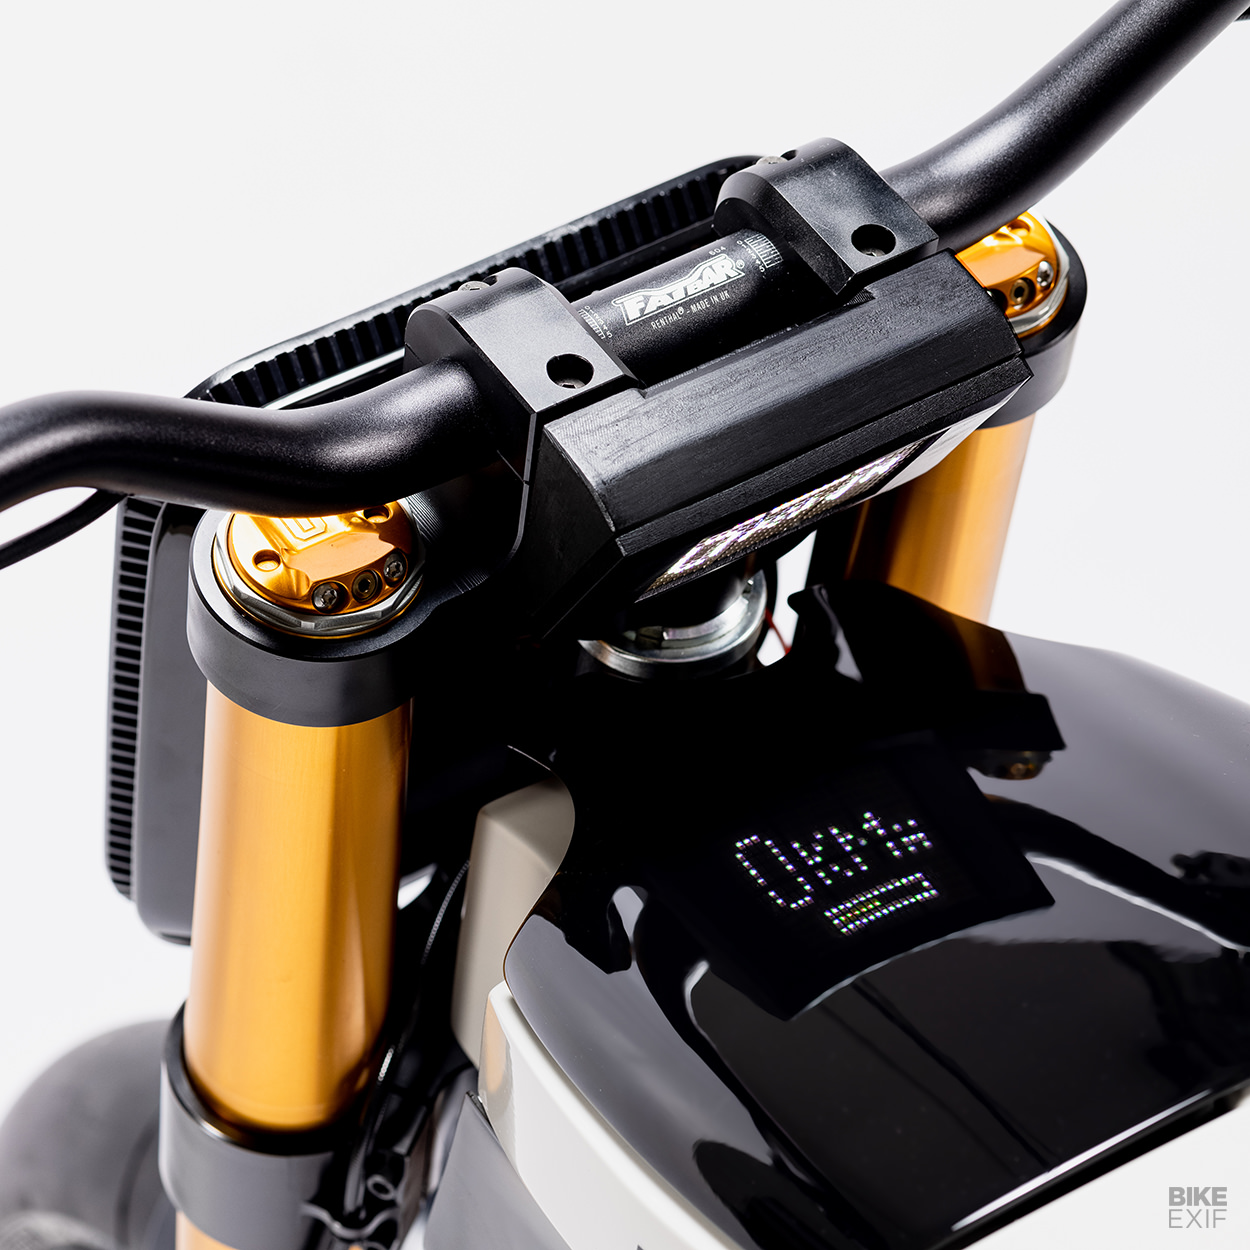 The DAB Motors Concept-E electric motorcycle